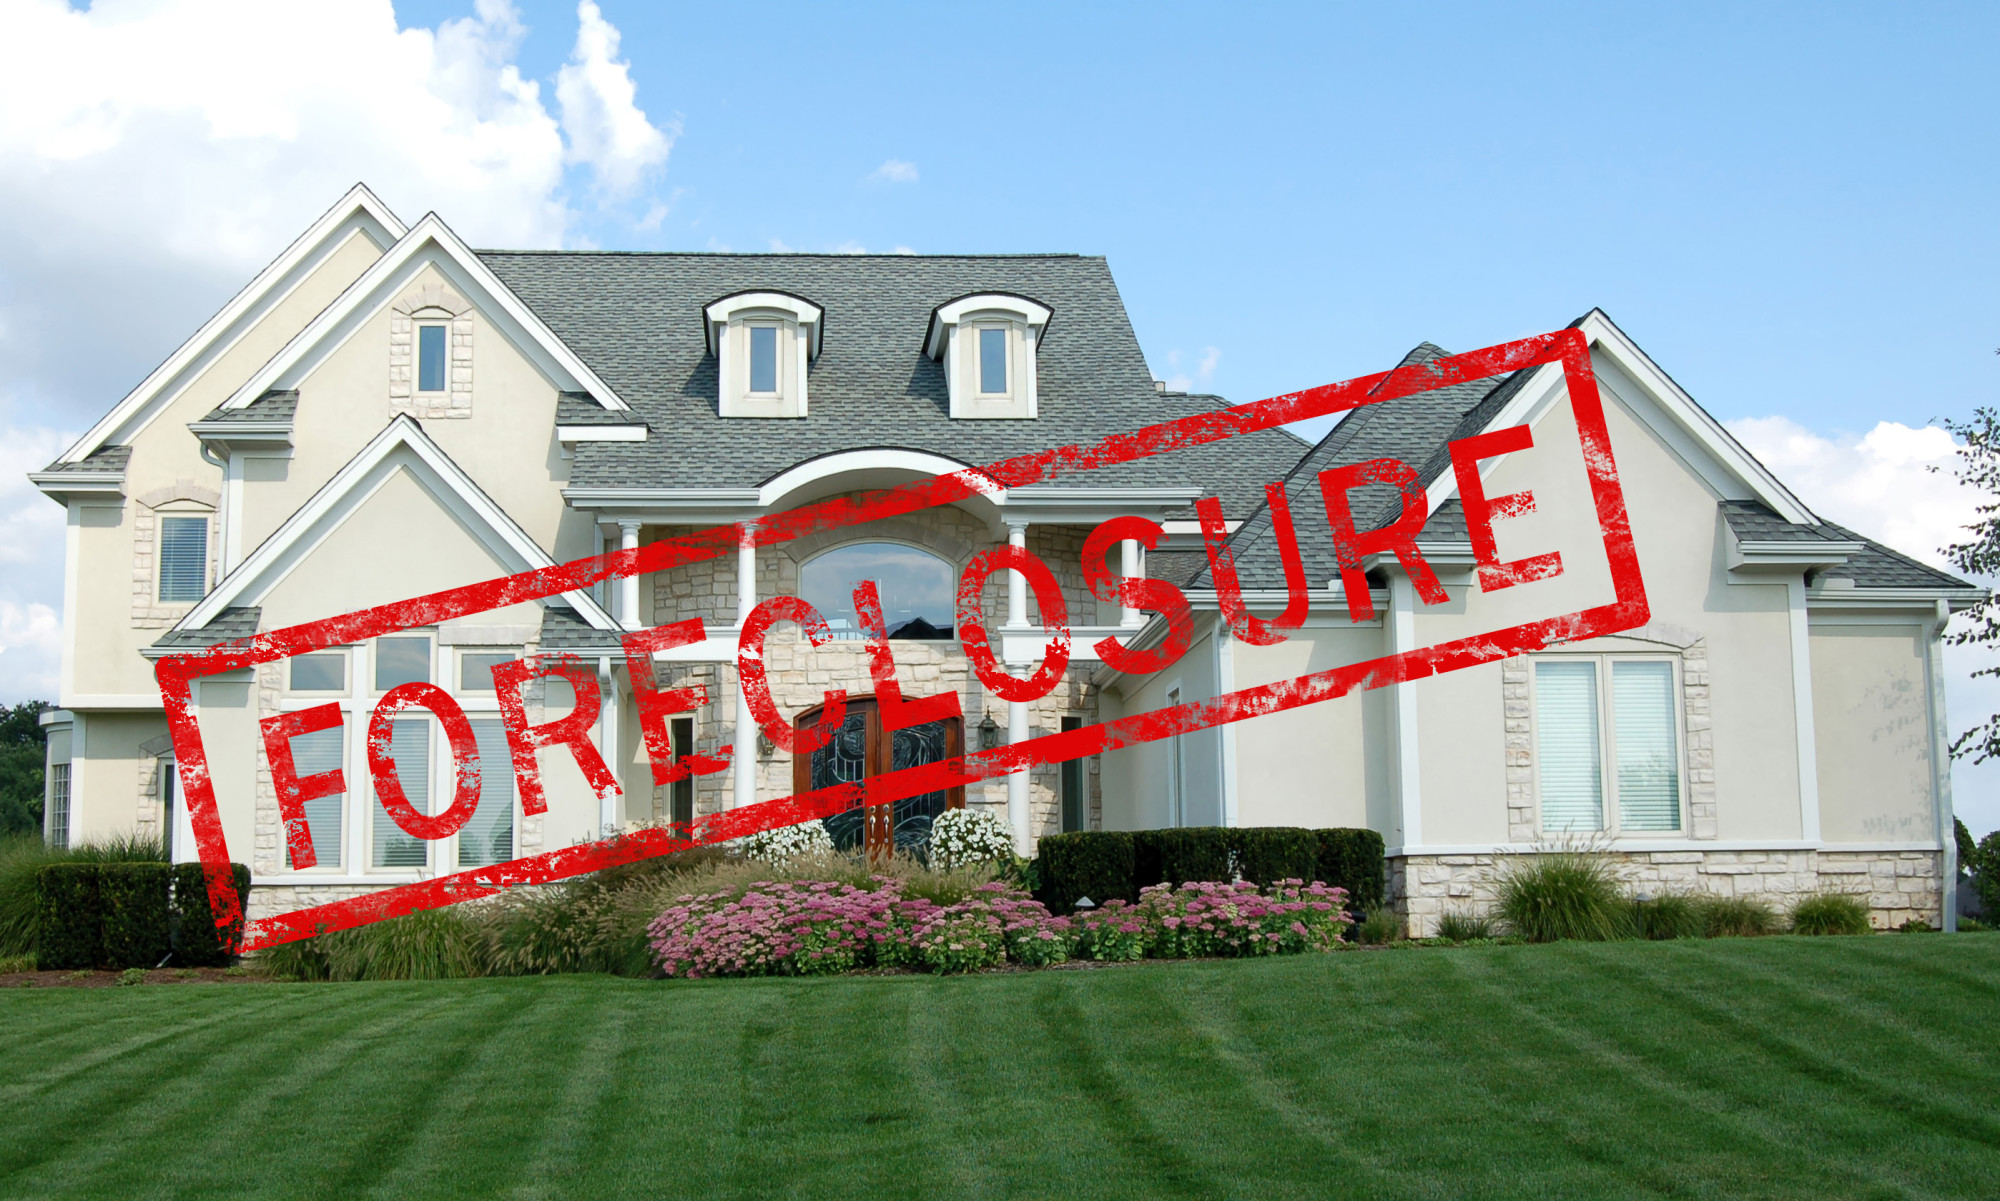 Trustee sale vs foreclosure: How much do you know about the differences between the two? Read on to learn more about the differences between them.